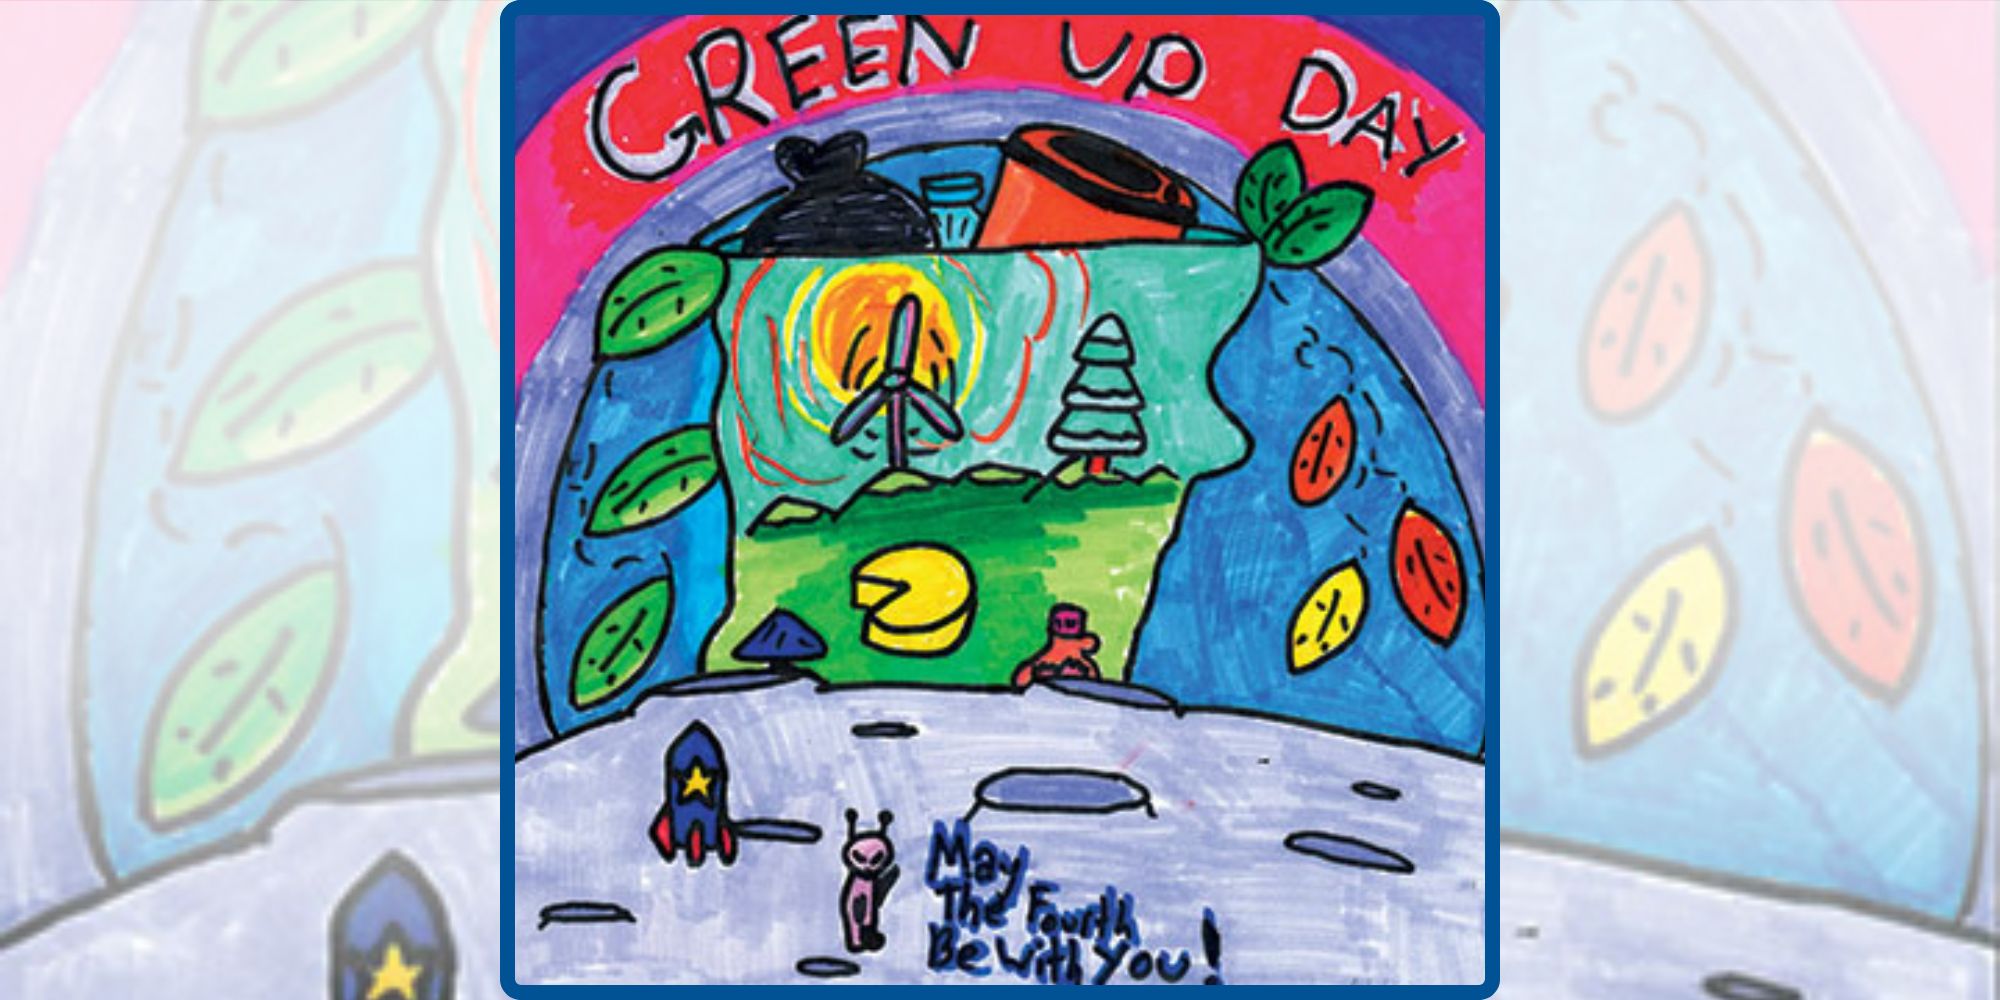 green up day poster 